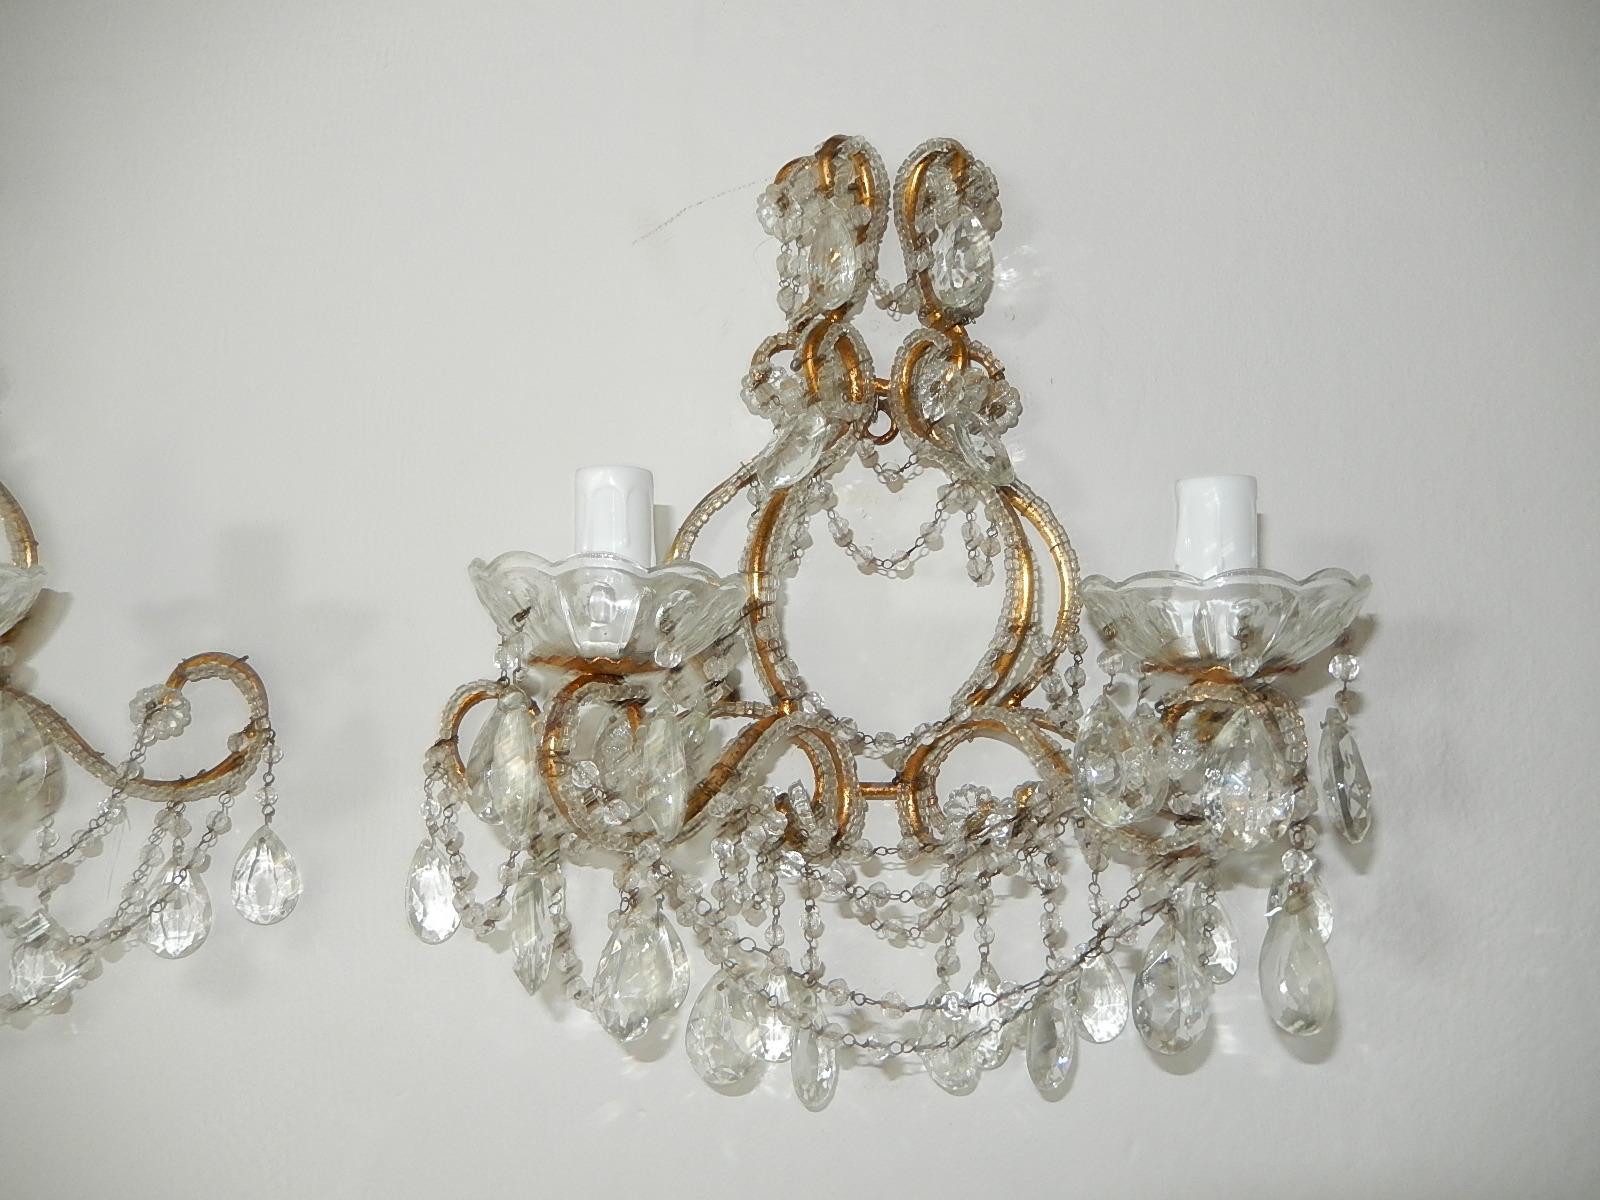 Early 20th Century 1900 Italian Rococo Beaded Crystal Prisms Gold Gilt Sconces For Sale